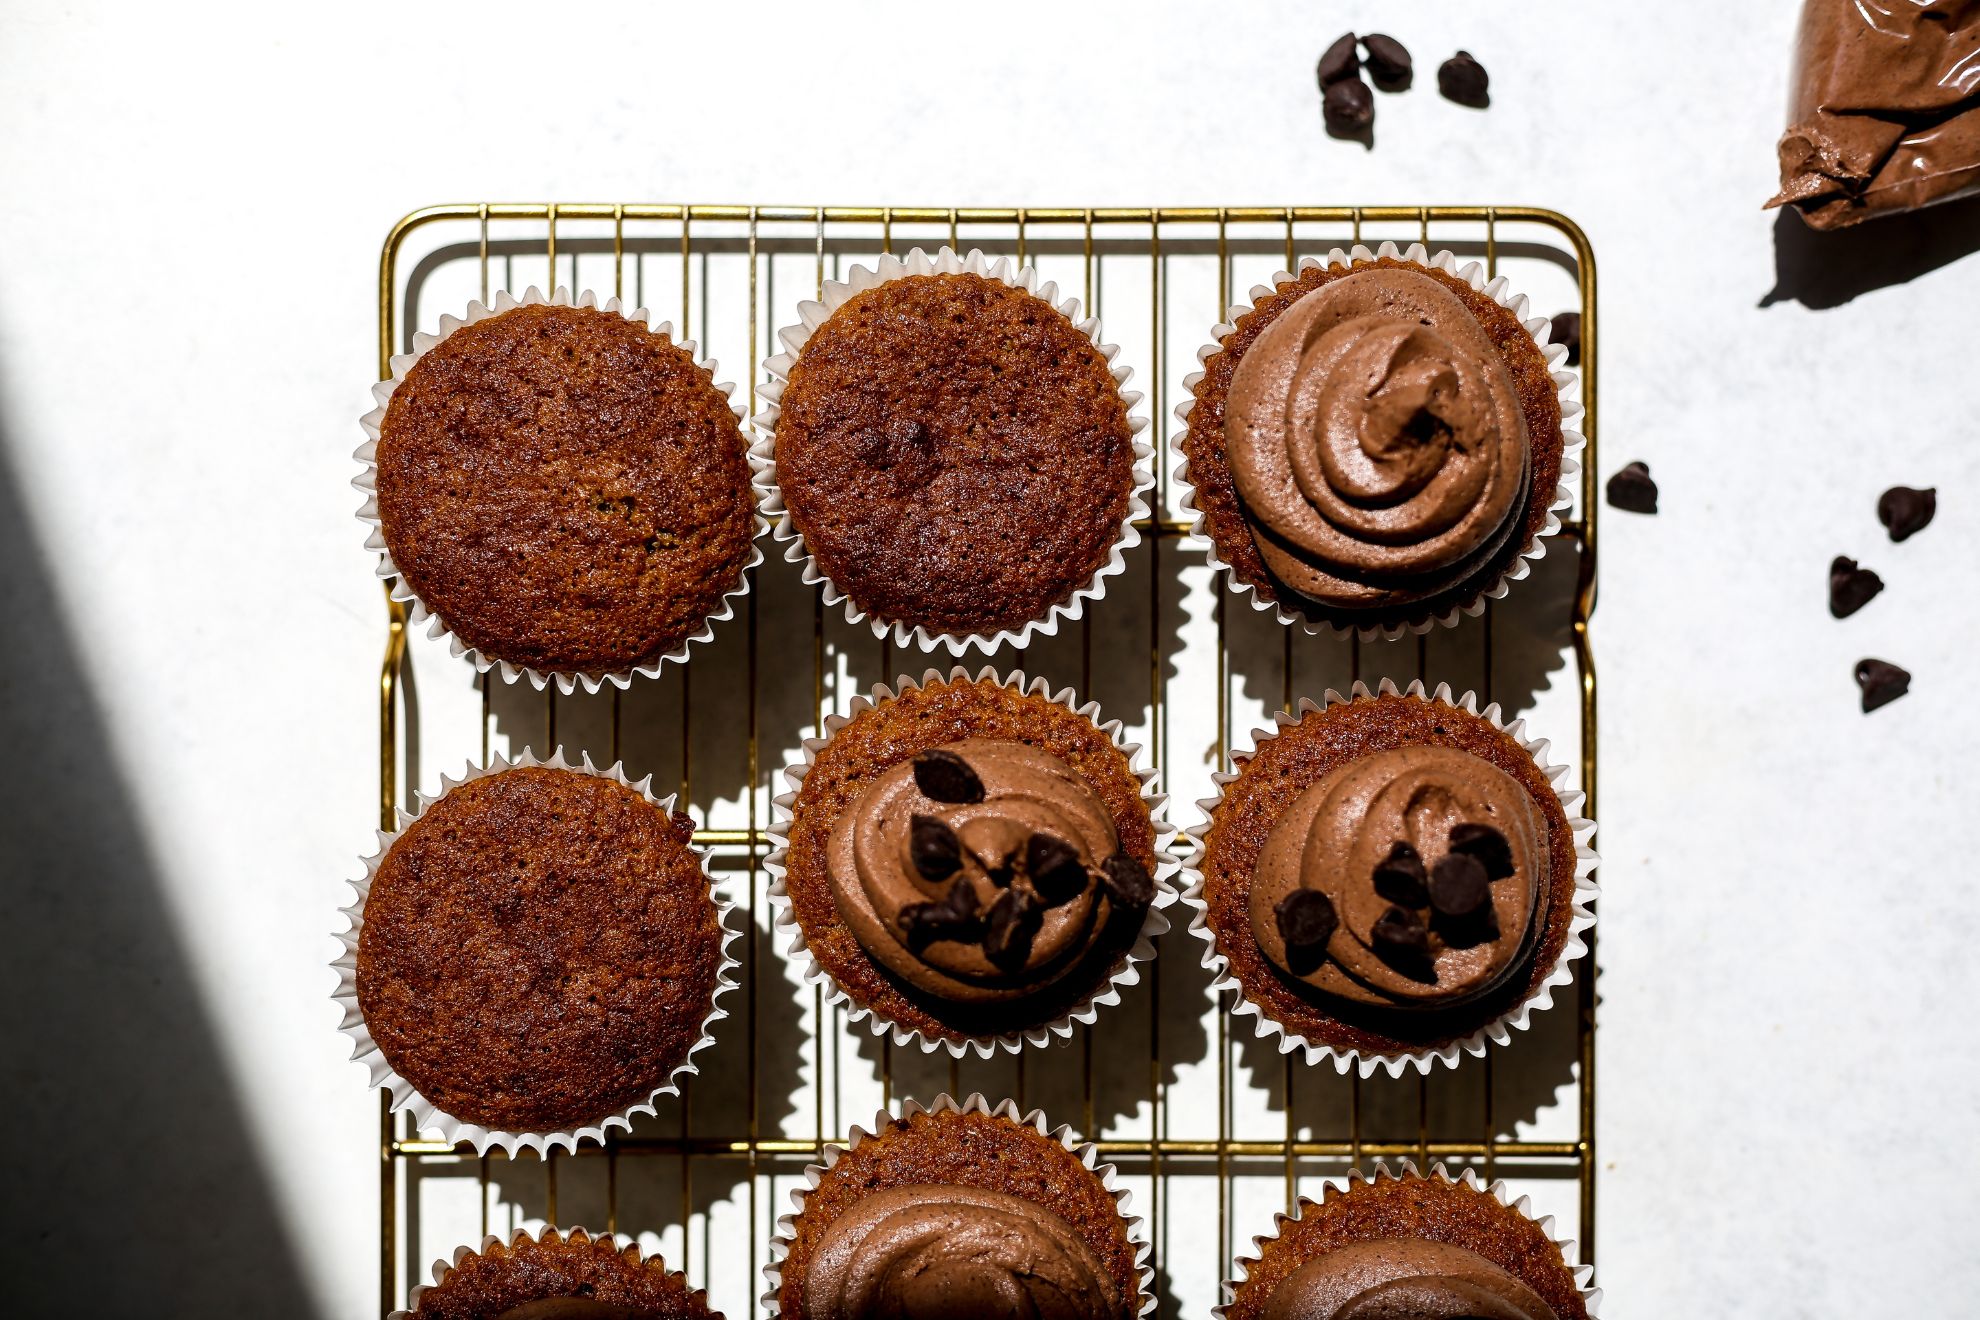 This is an overhead horizontal image of a gold cooling rack on a white surface. On the cooling rack are caramel colored cupcakes with white cupcake liners. Half of the cupcakes have chocolate frosting swirled on top with chocolate chips on top. To the top right corner of the image is a plastic baggie with chocolate frosting and some chocolate chips scattered around it.